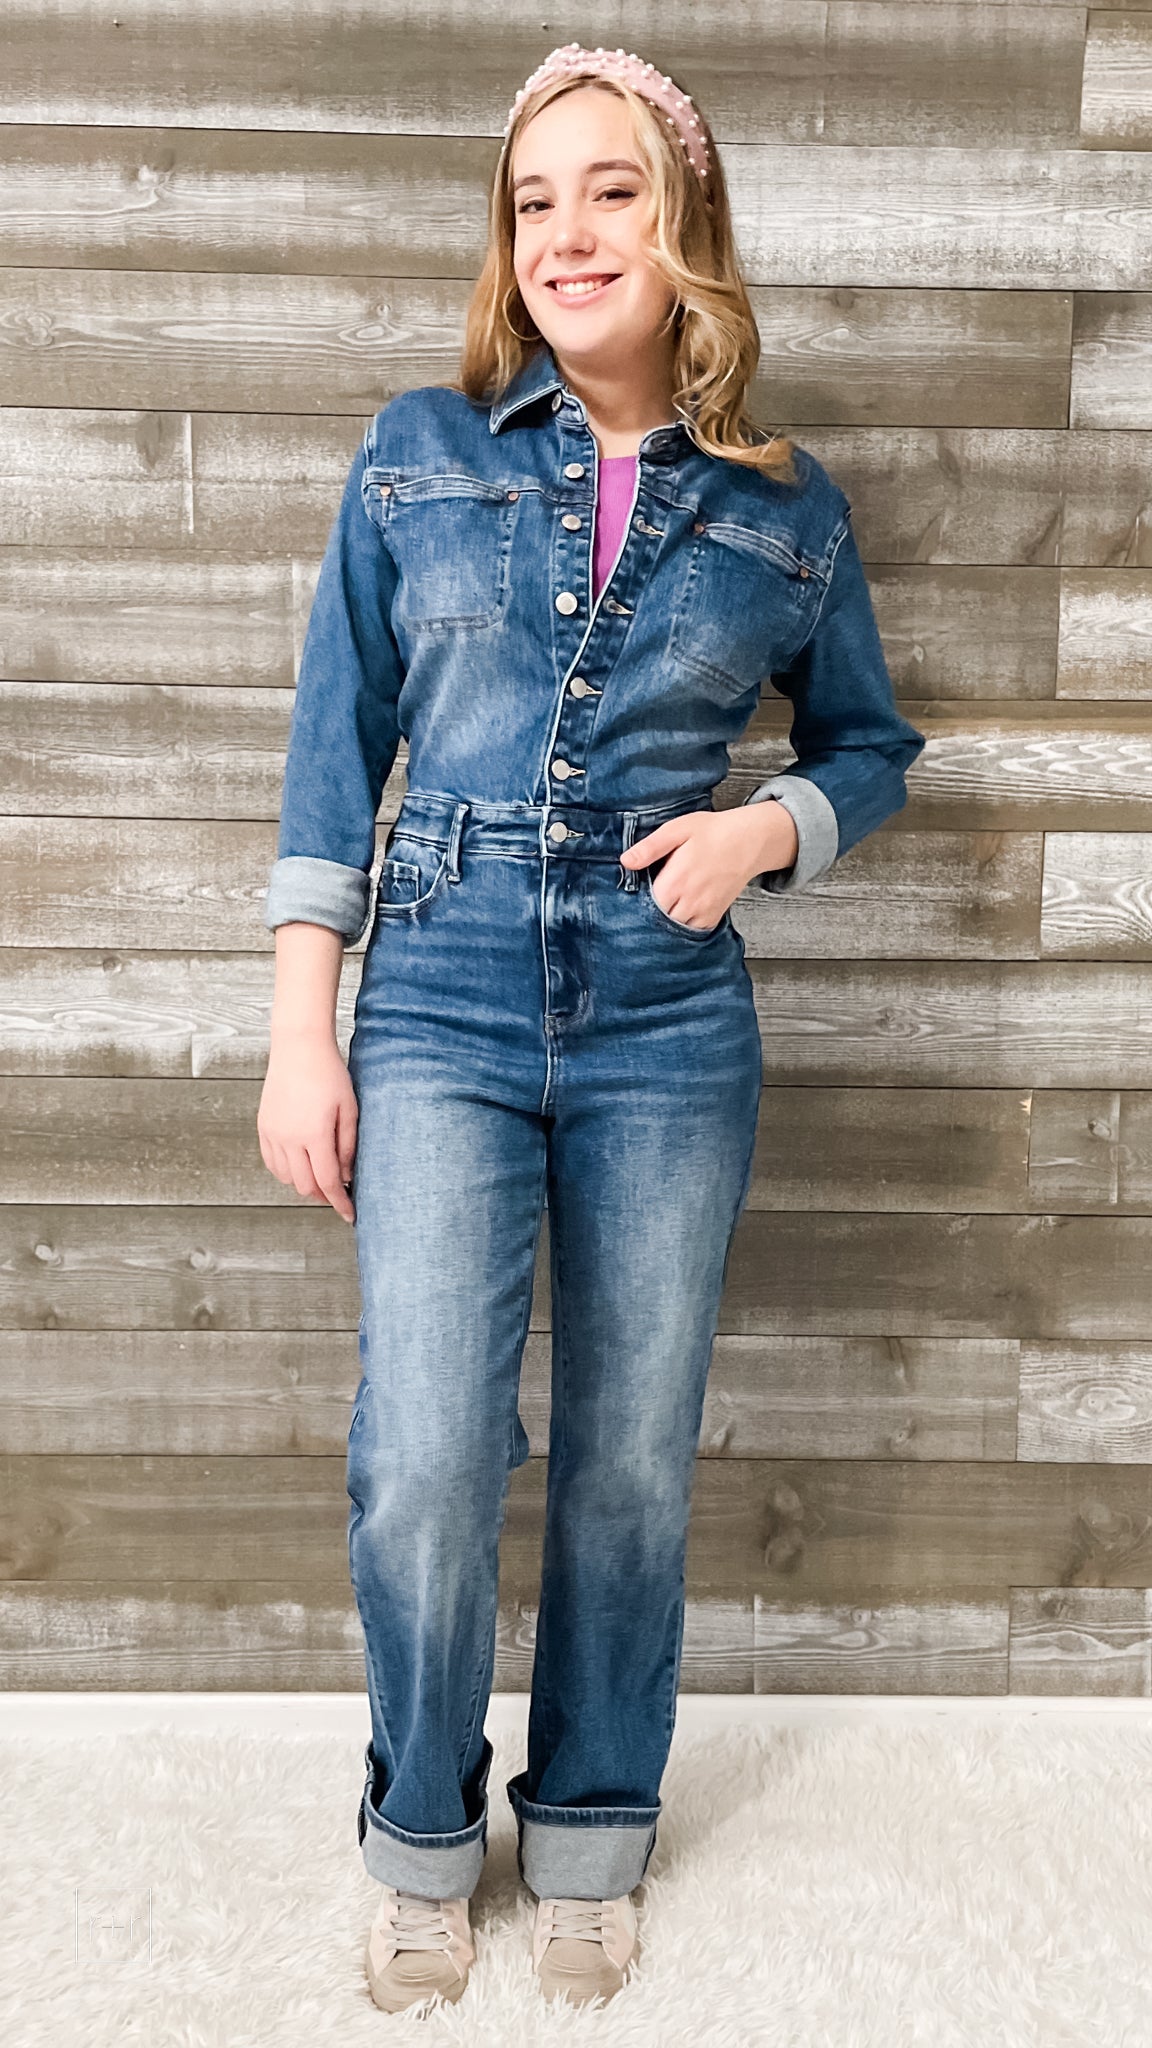 2023 Spring Womens Denim Wide Leg Denim Jumpsuit With Lapel, Long Sleeves,  And Loose Fit For Street Casual Fashion Trend From Peacearth, $49.16 |  DHgate.Com